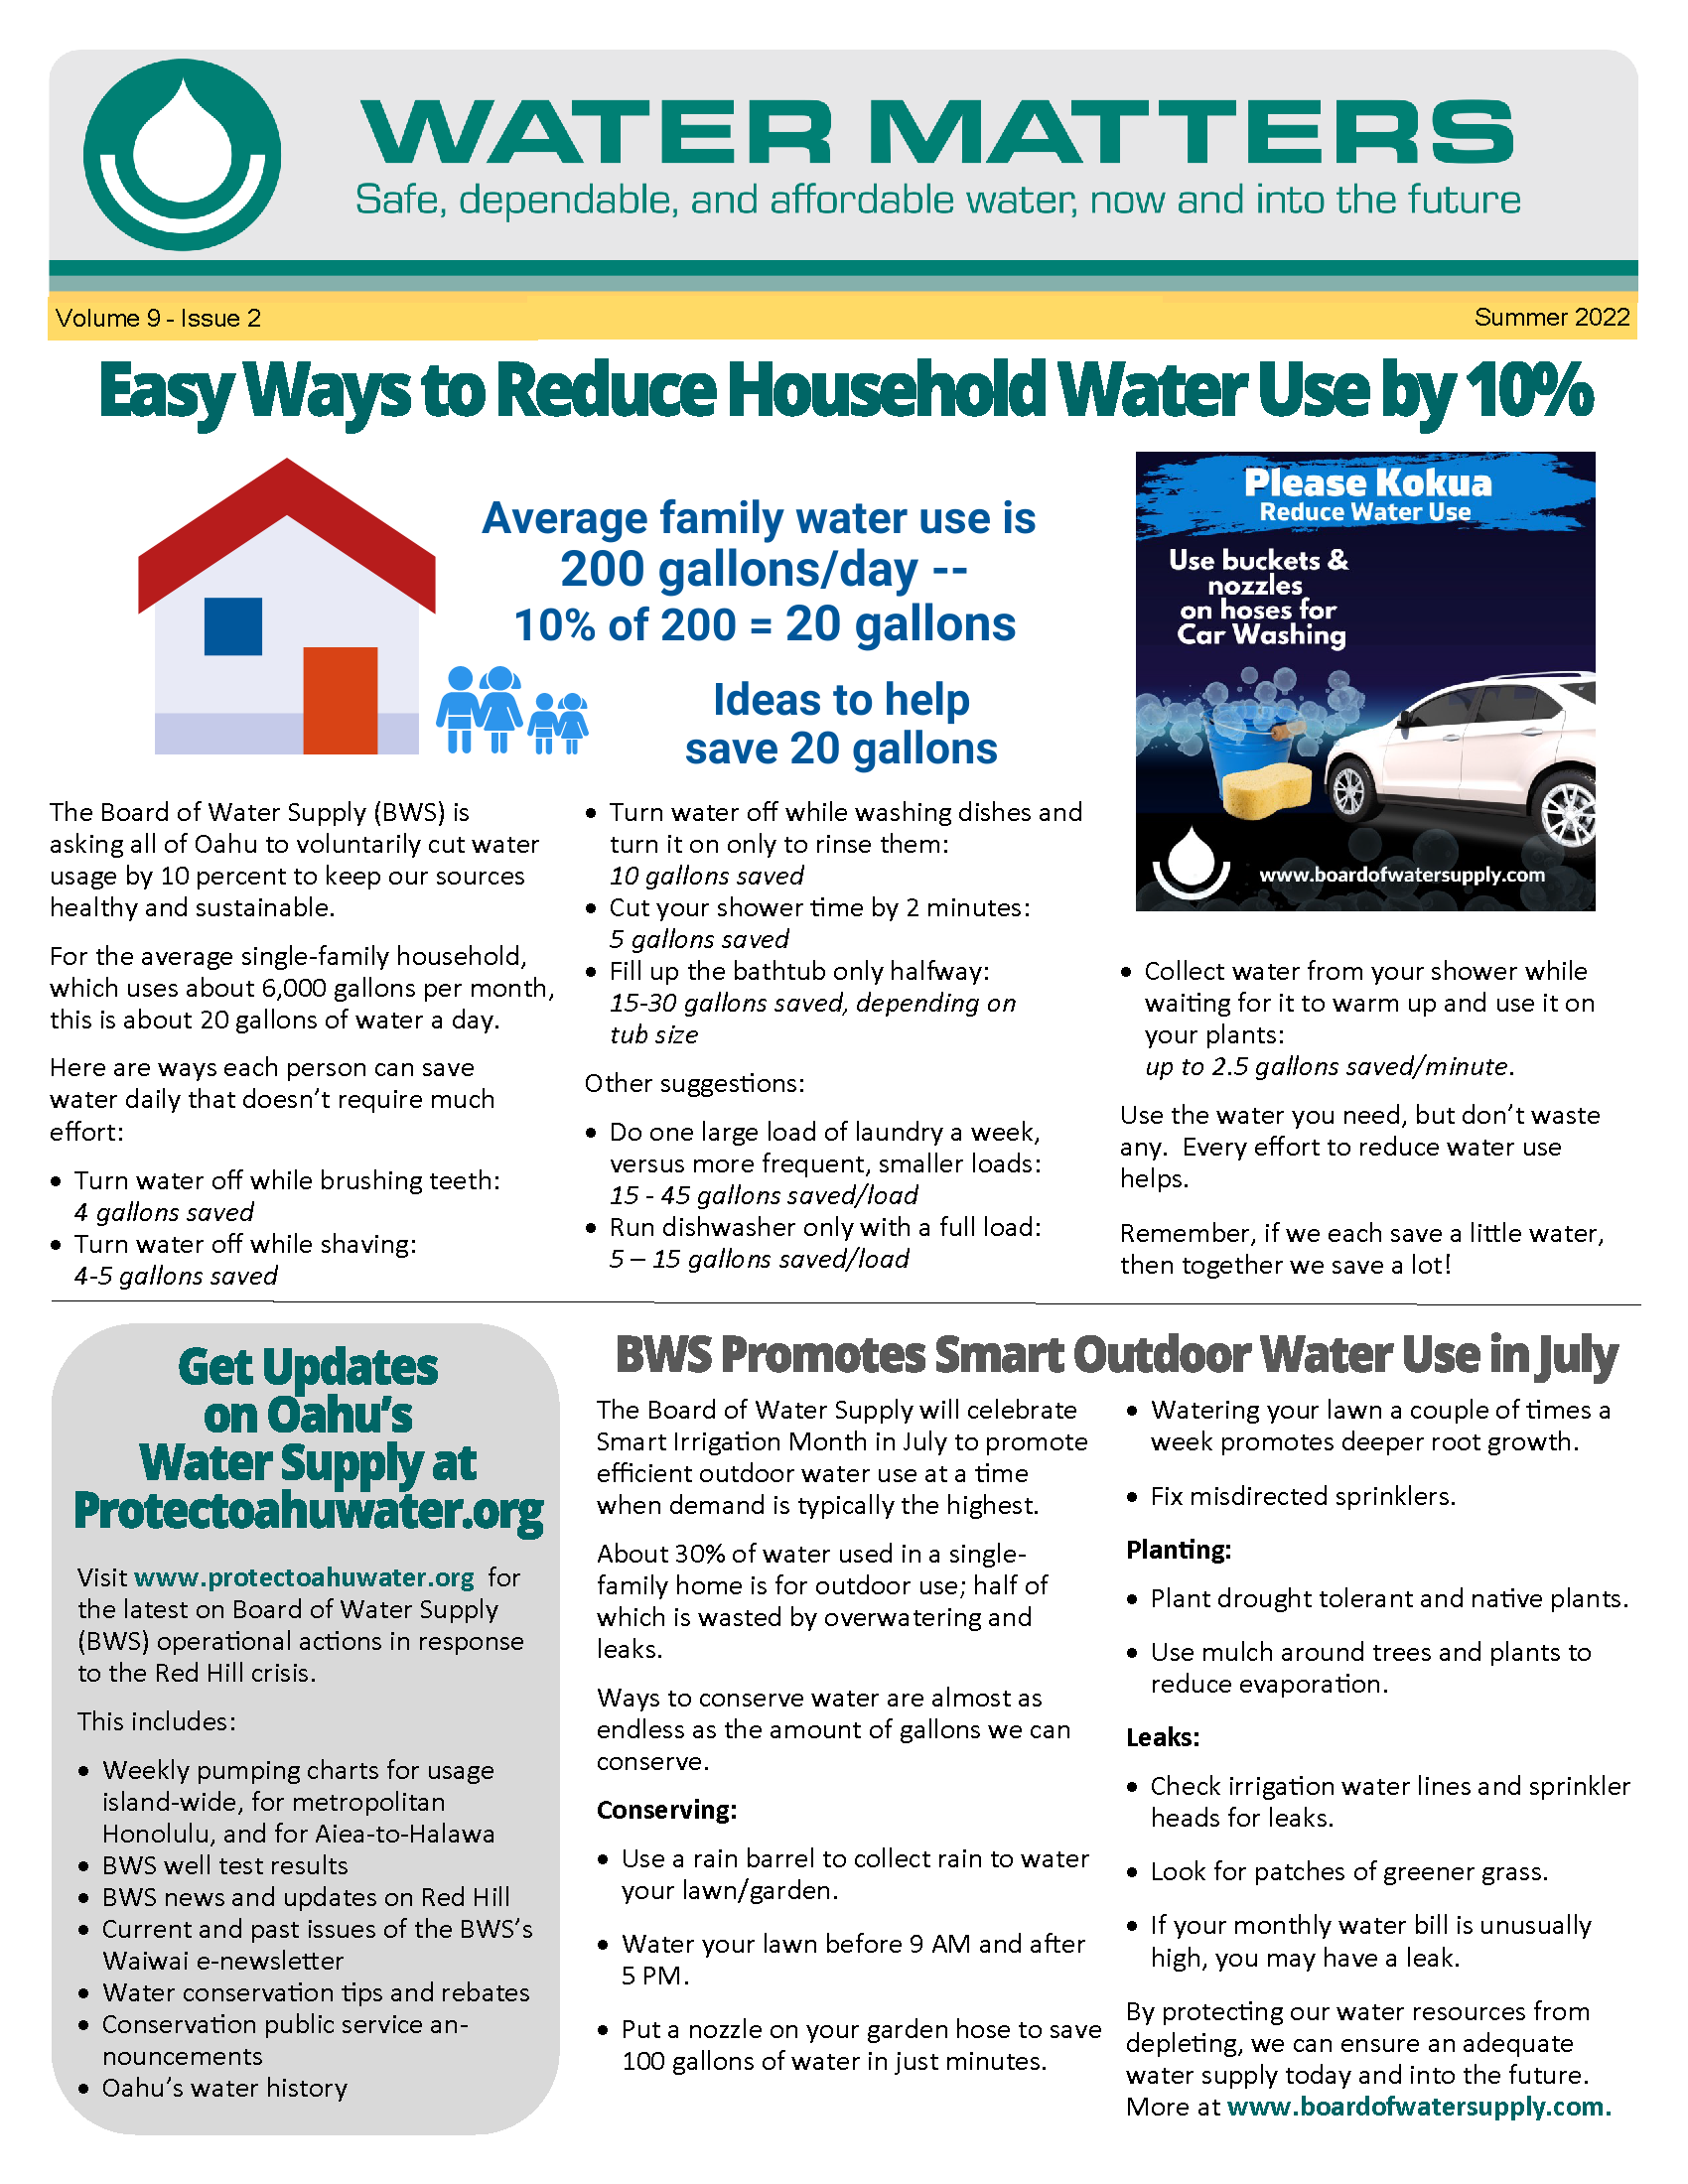 water matters issue 2 2022